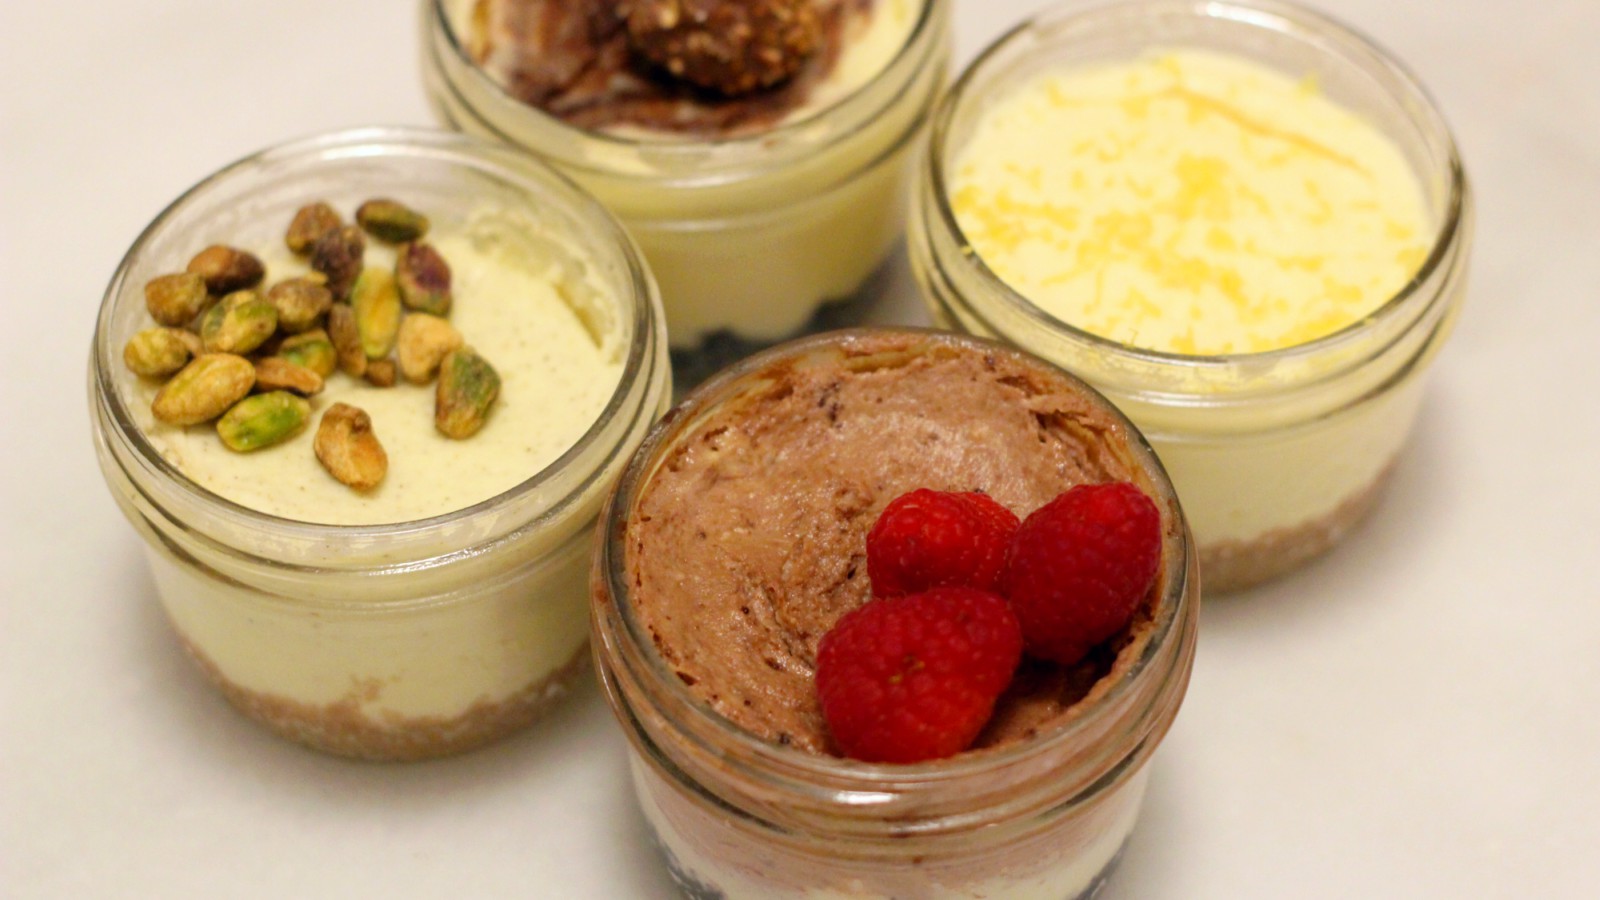 Make A Four-Flavour Cheesecake Sampler In Your Pressure Cooker